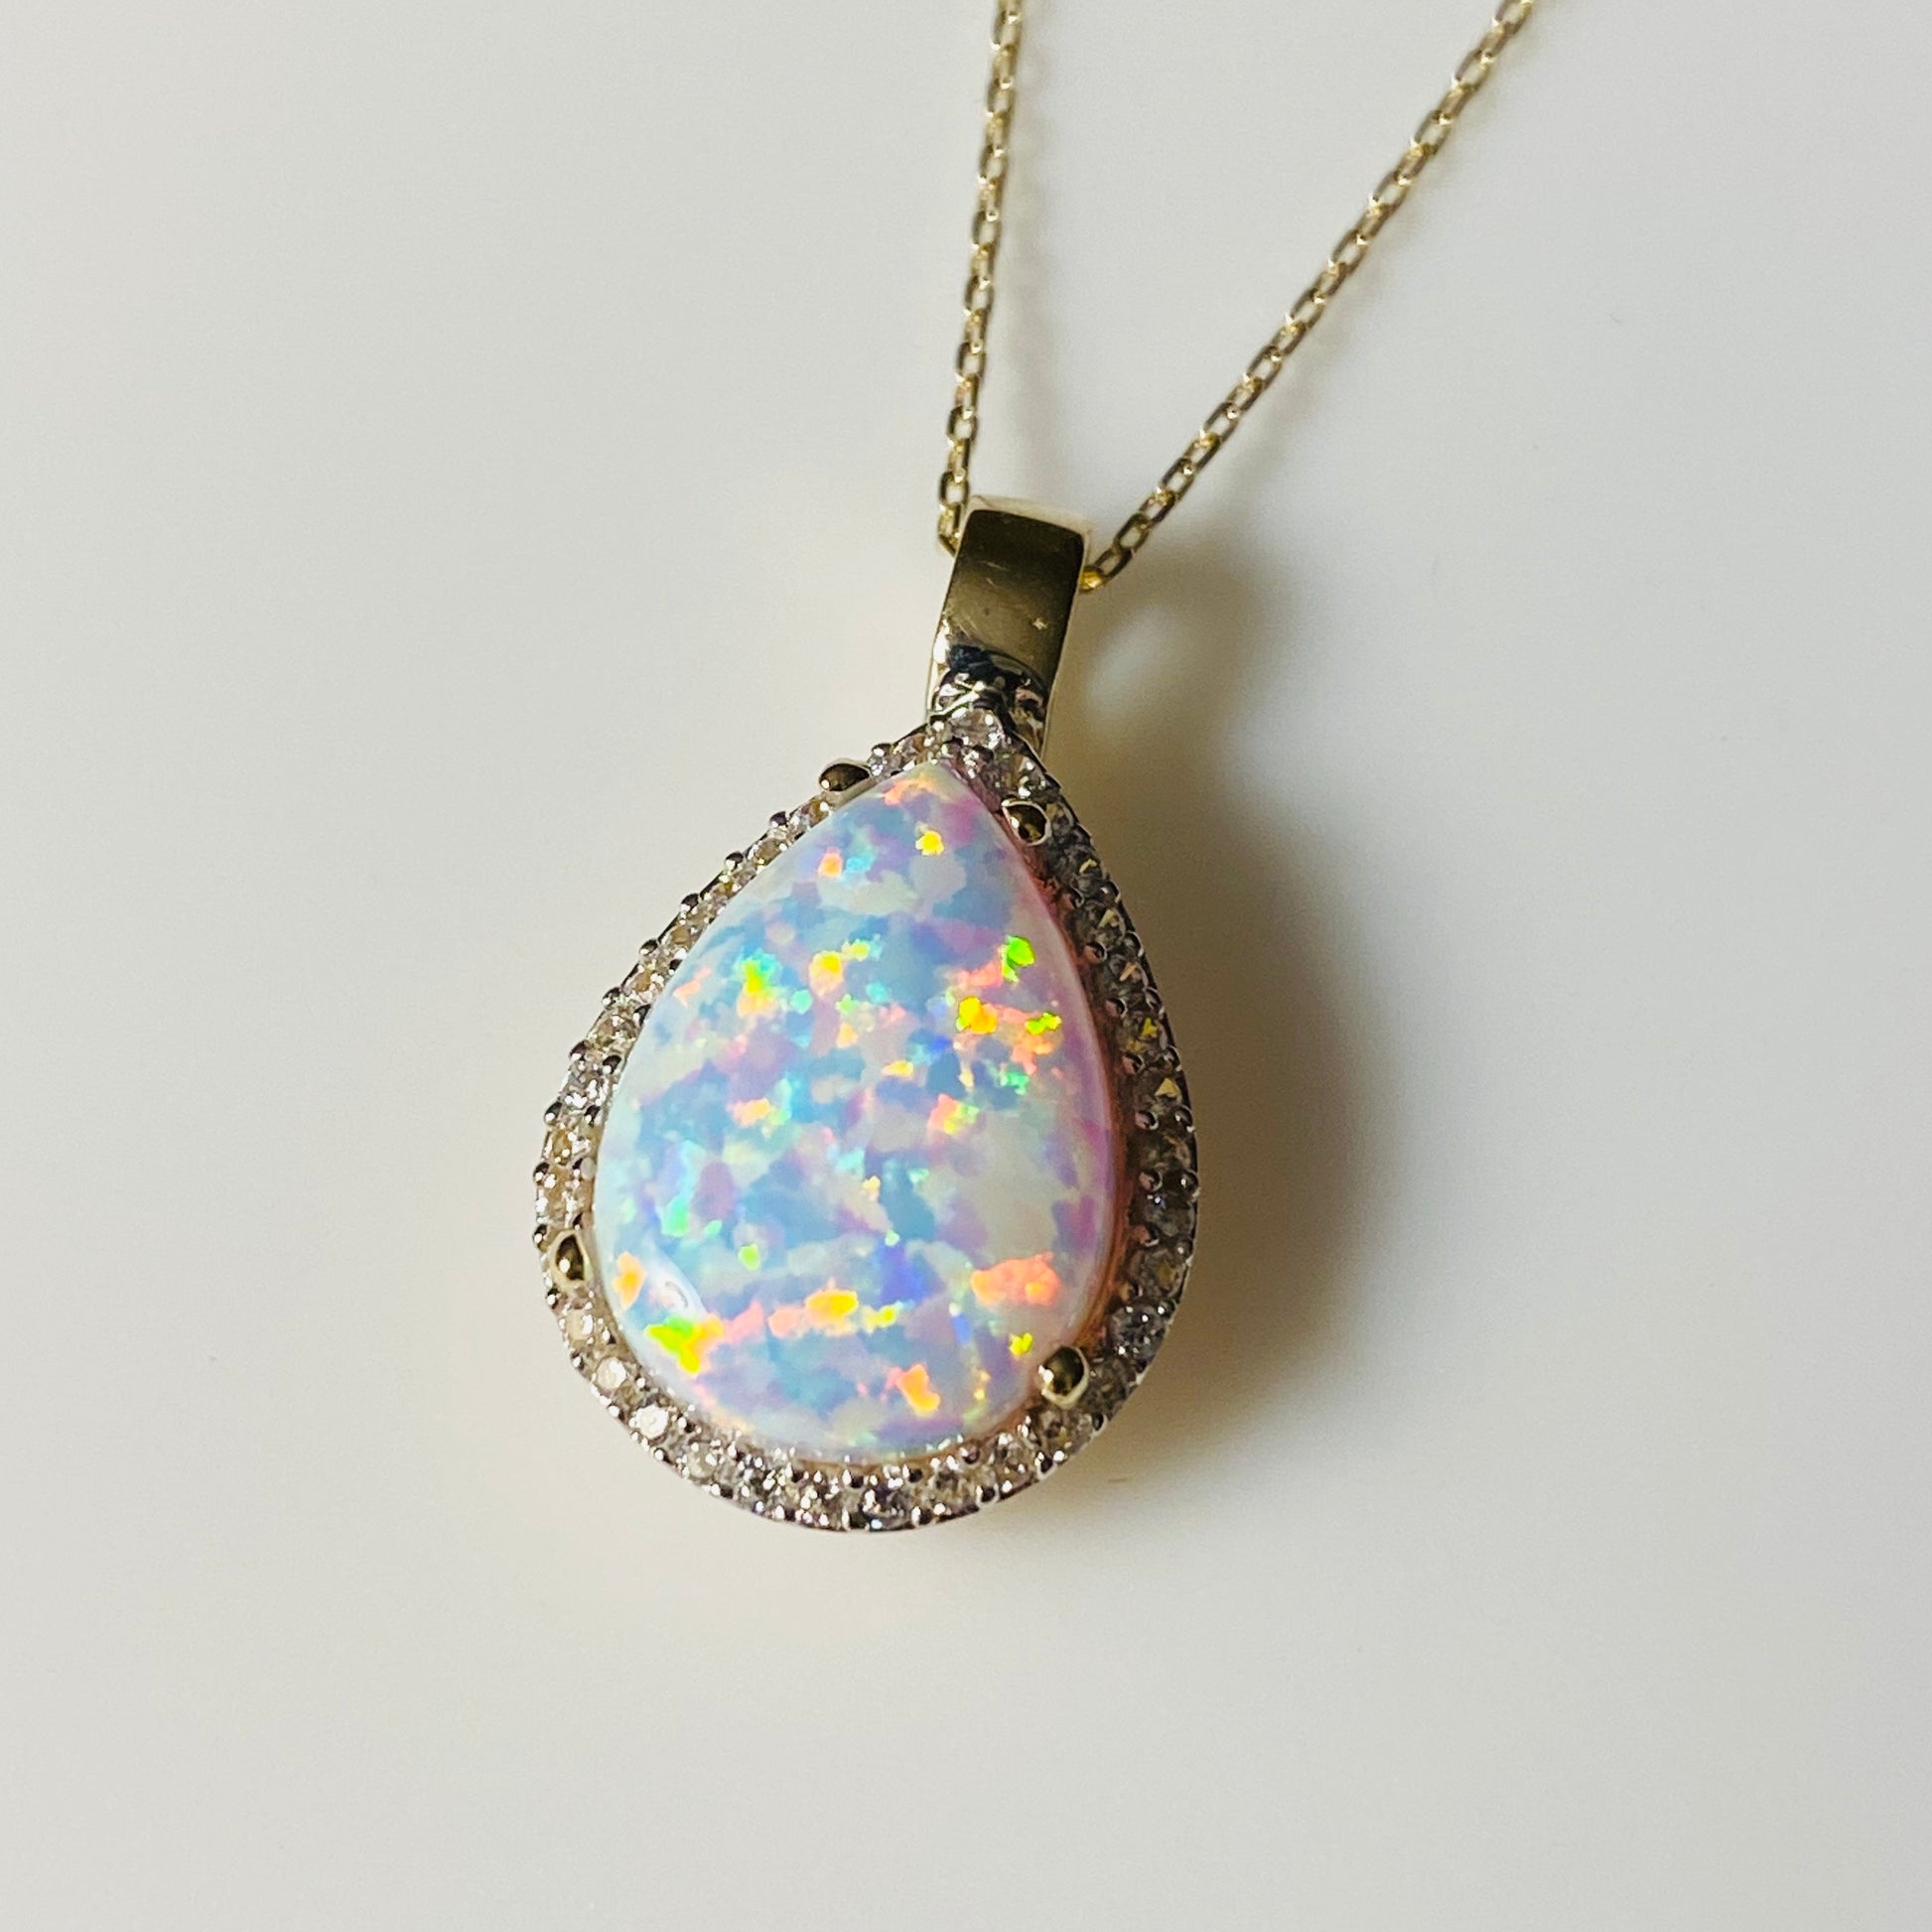 9ct Gold CZ Pear Shaped Opalique Necklace - John Ross Jewellers